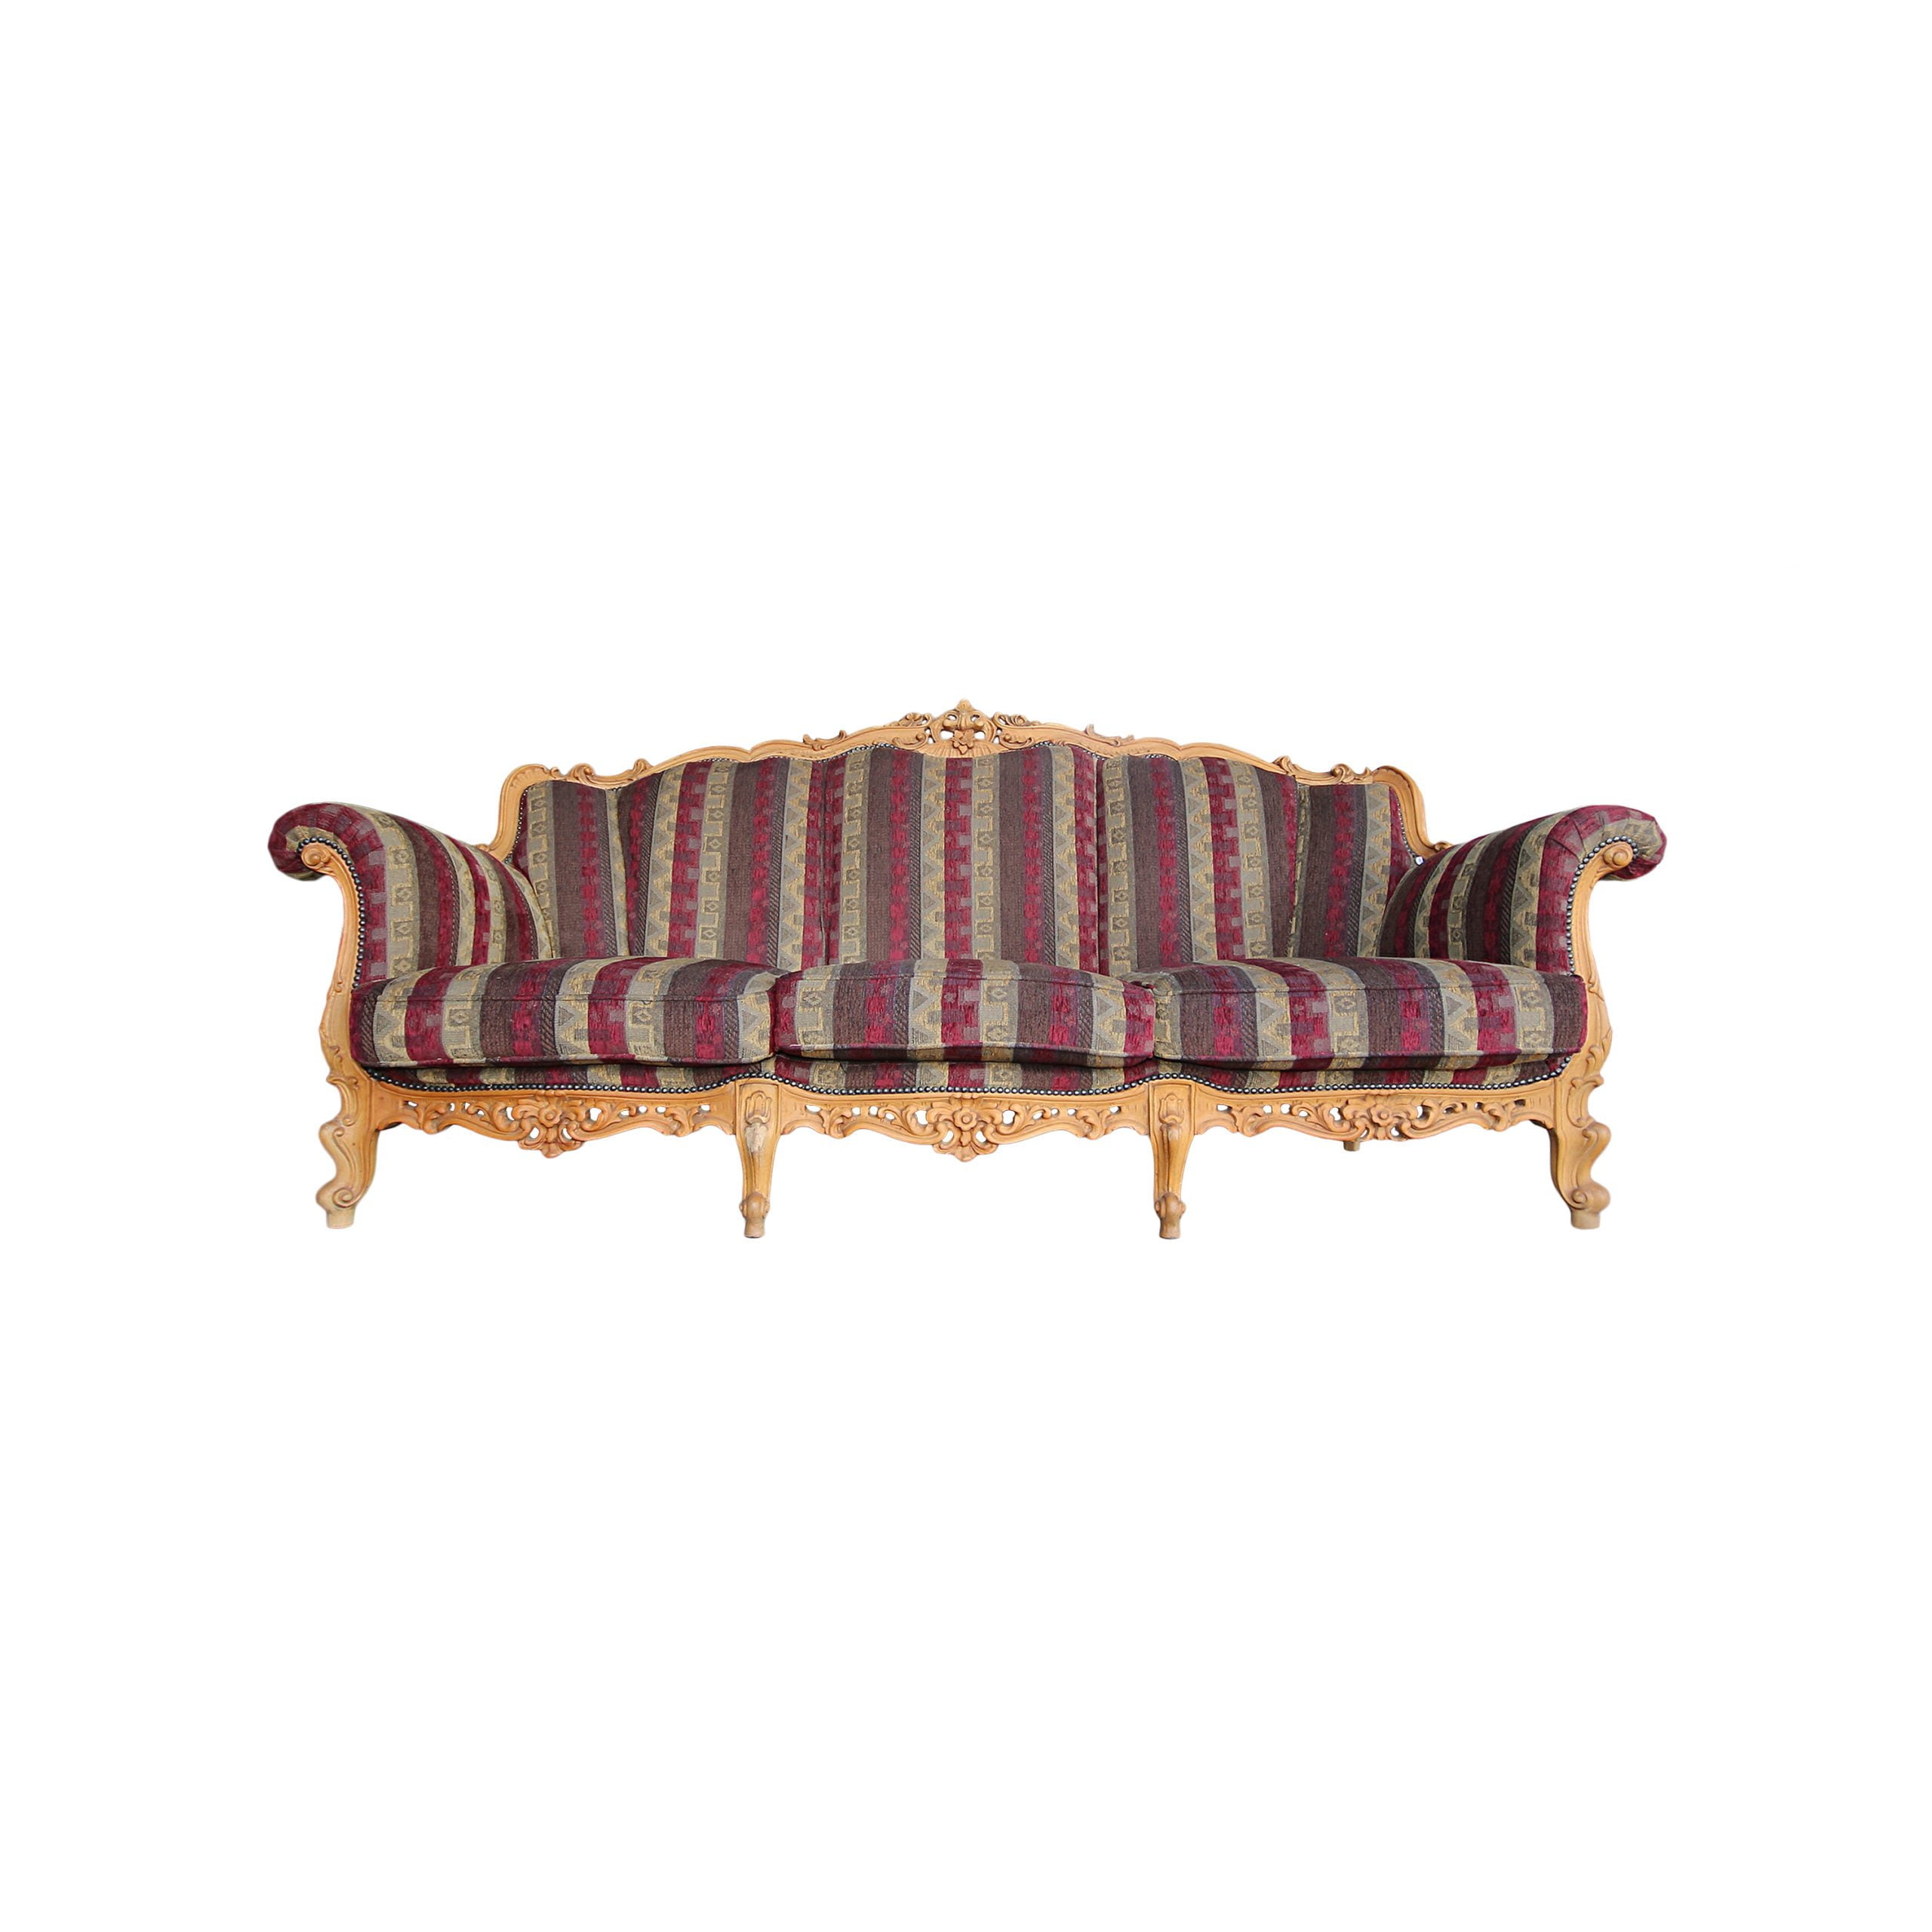 20th century french 3 seater sofa